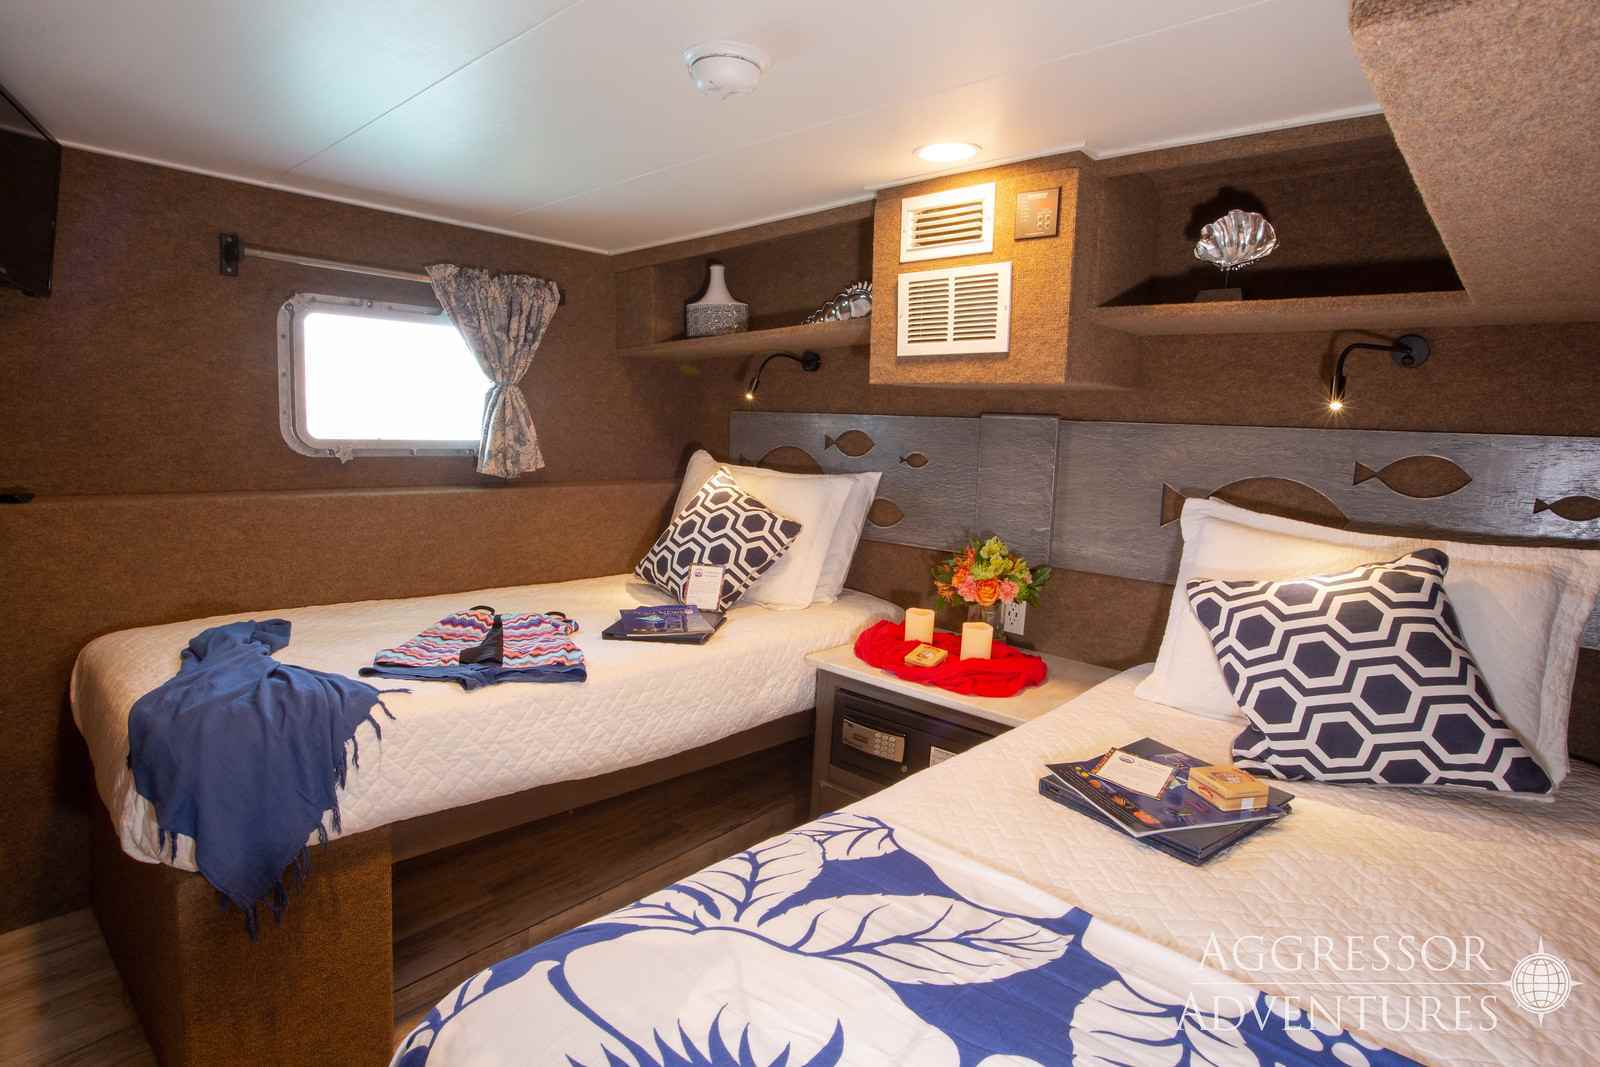 In a cabin of the Cayman Aggressor, there are two twin beds nicely prepared with sheets, extra pillows, blankets, and a treat.